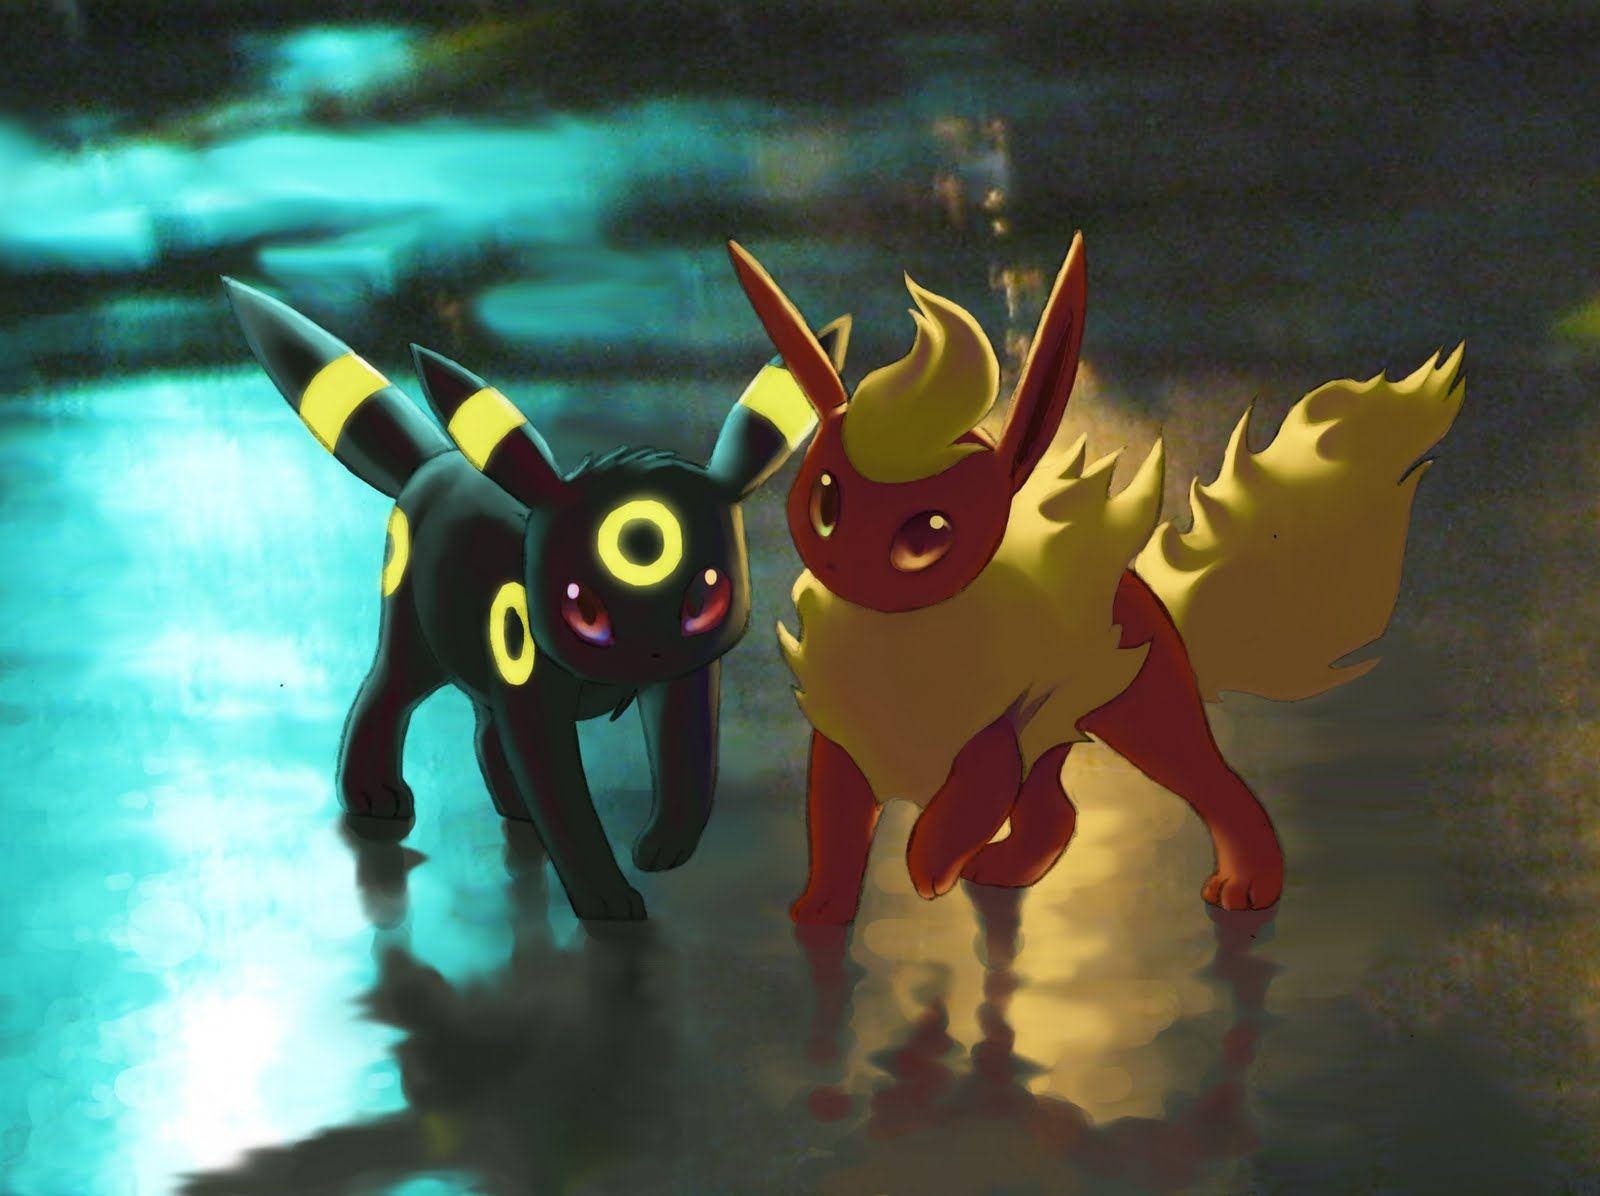 Download Flareon And Umbreon From Pokemon Wallpaper